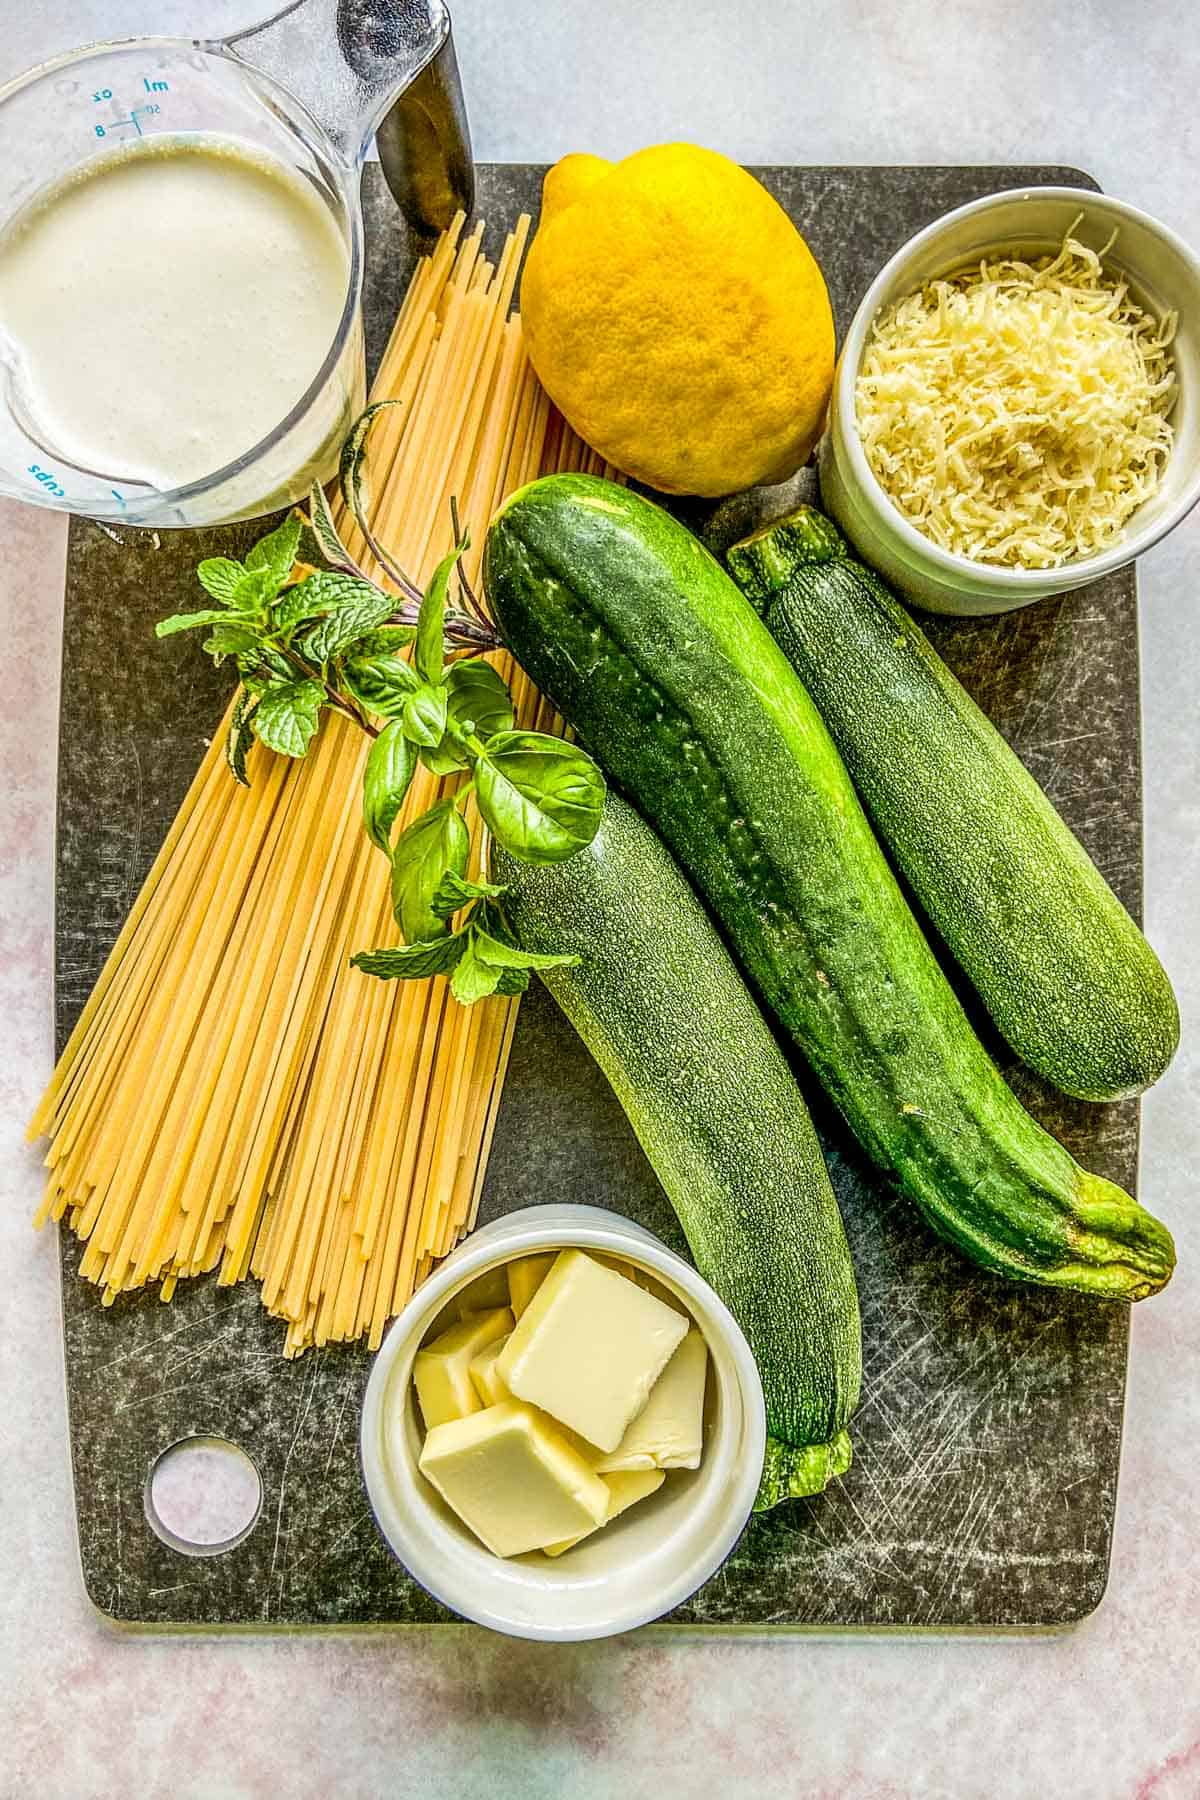 Ingredients for a creamy zucchini pasta.